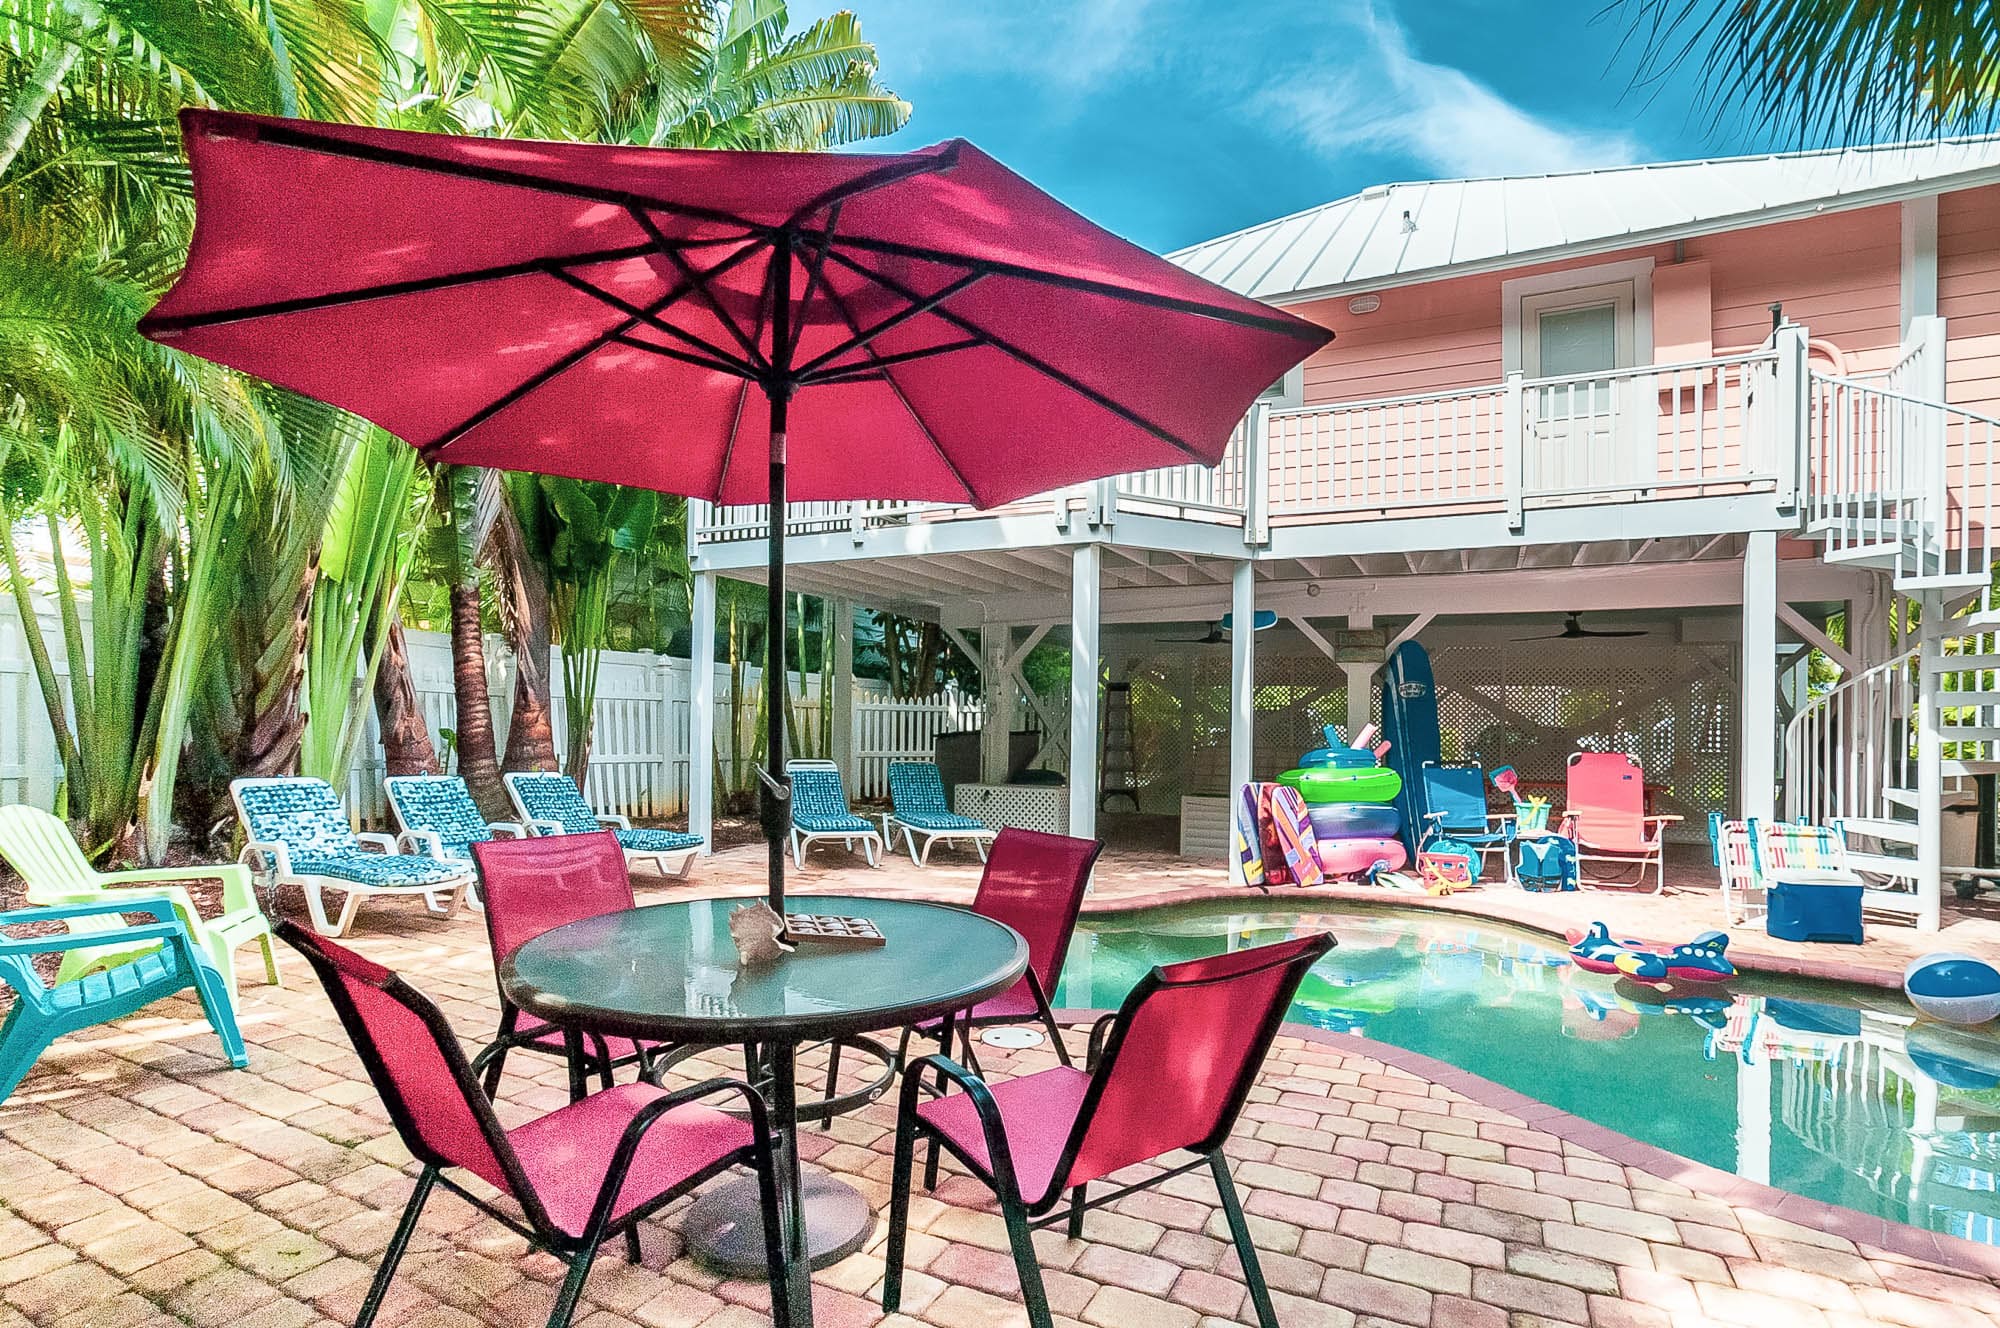 photo of the vacation rental Art n Sol from the back, featuring the outdoor dining area, patio with chairs, pool area as well as beach floats.